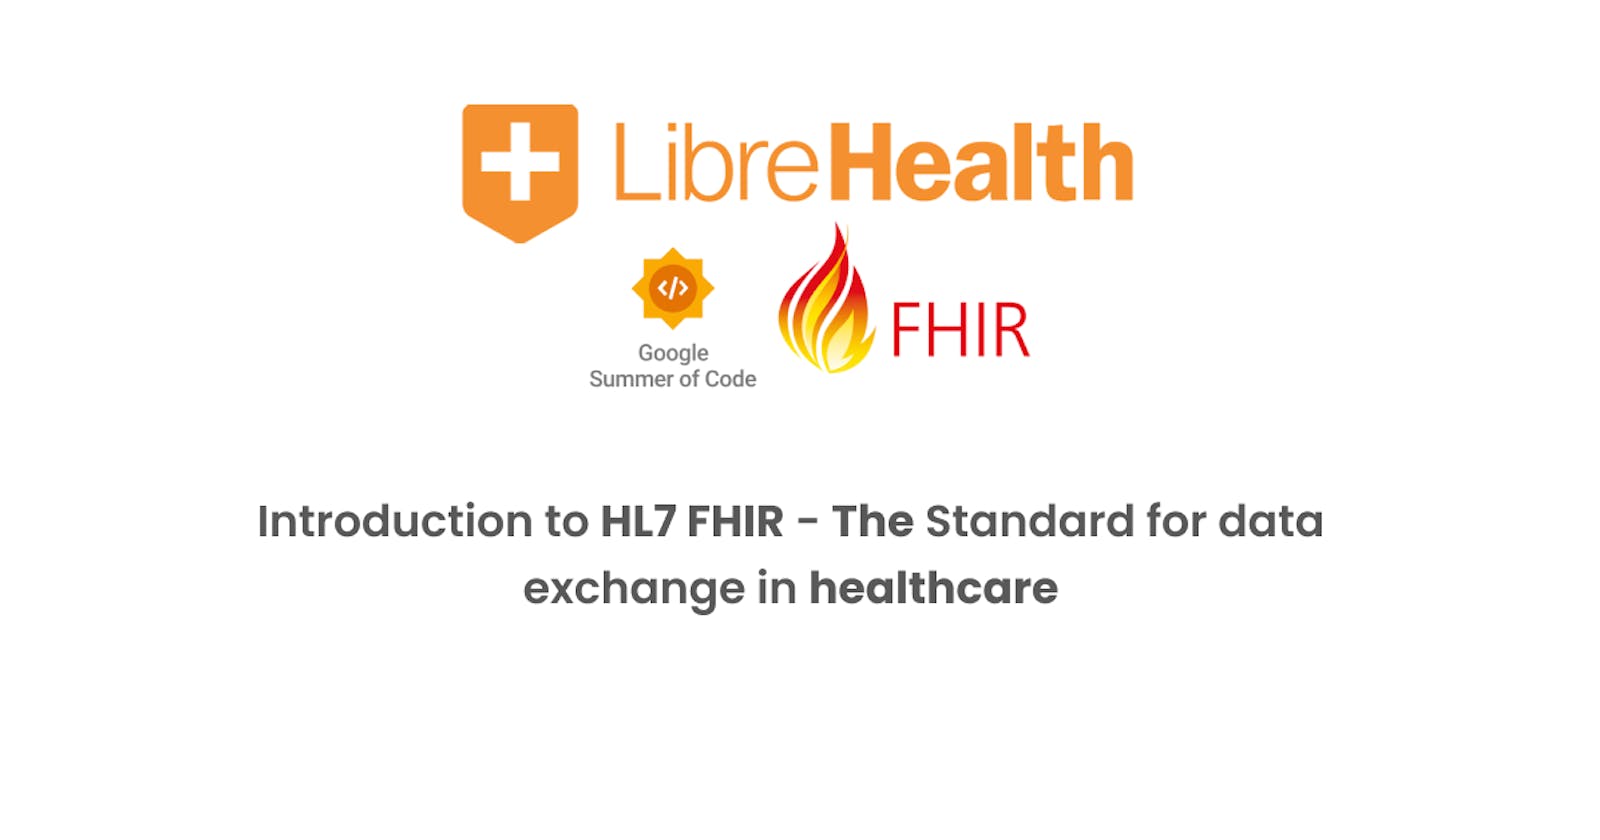 Introduction to FHIR - The Standard for data exchange in healthcare